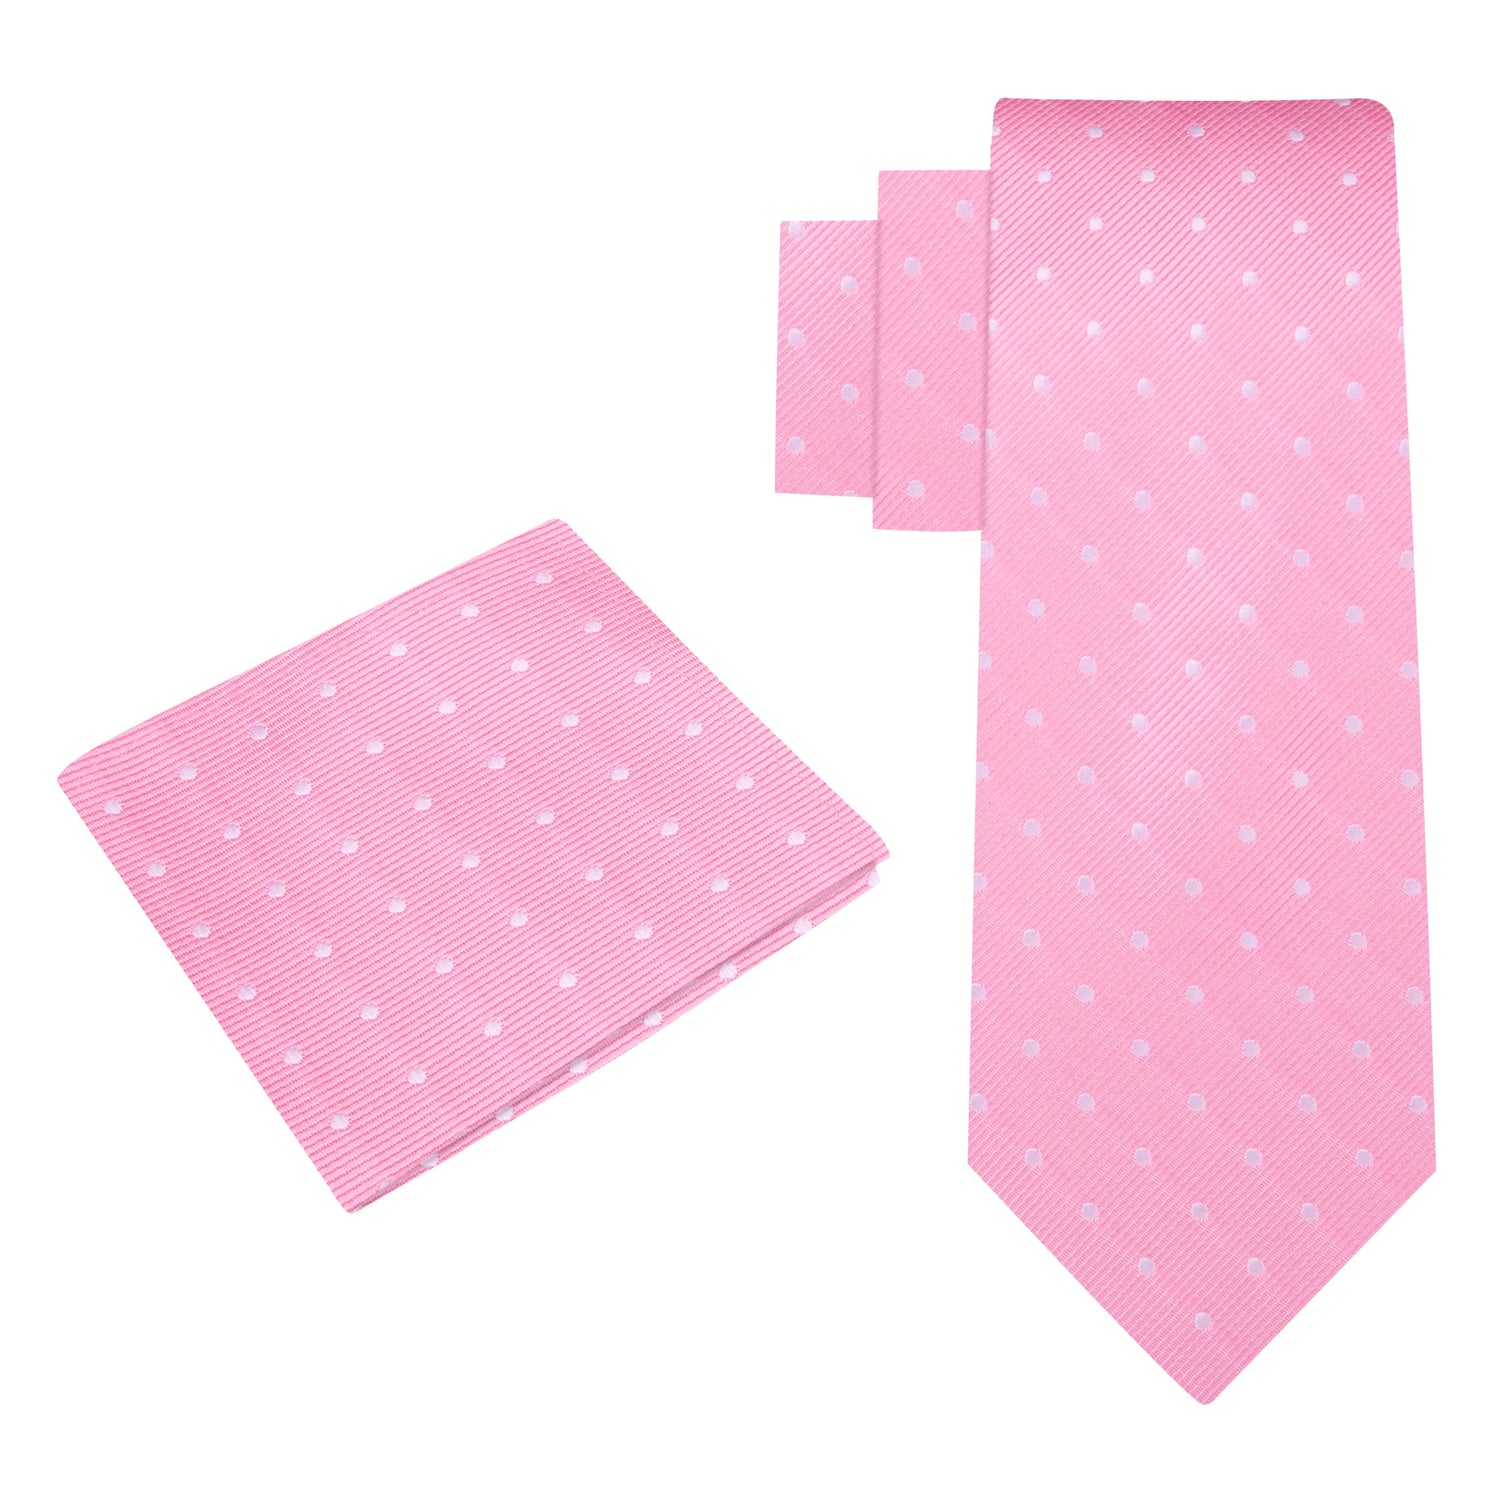 View 2: Pink and White Polka Necktie and Matching Square